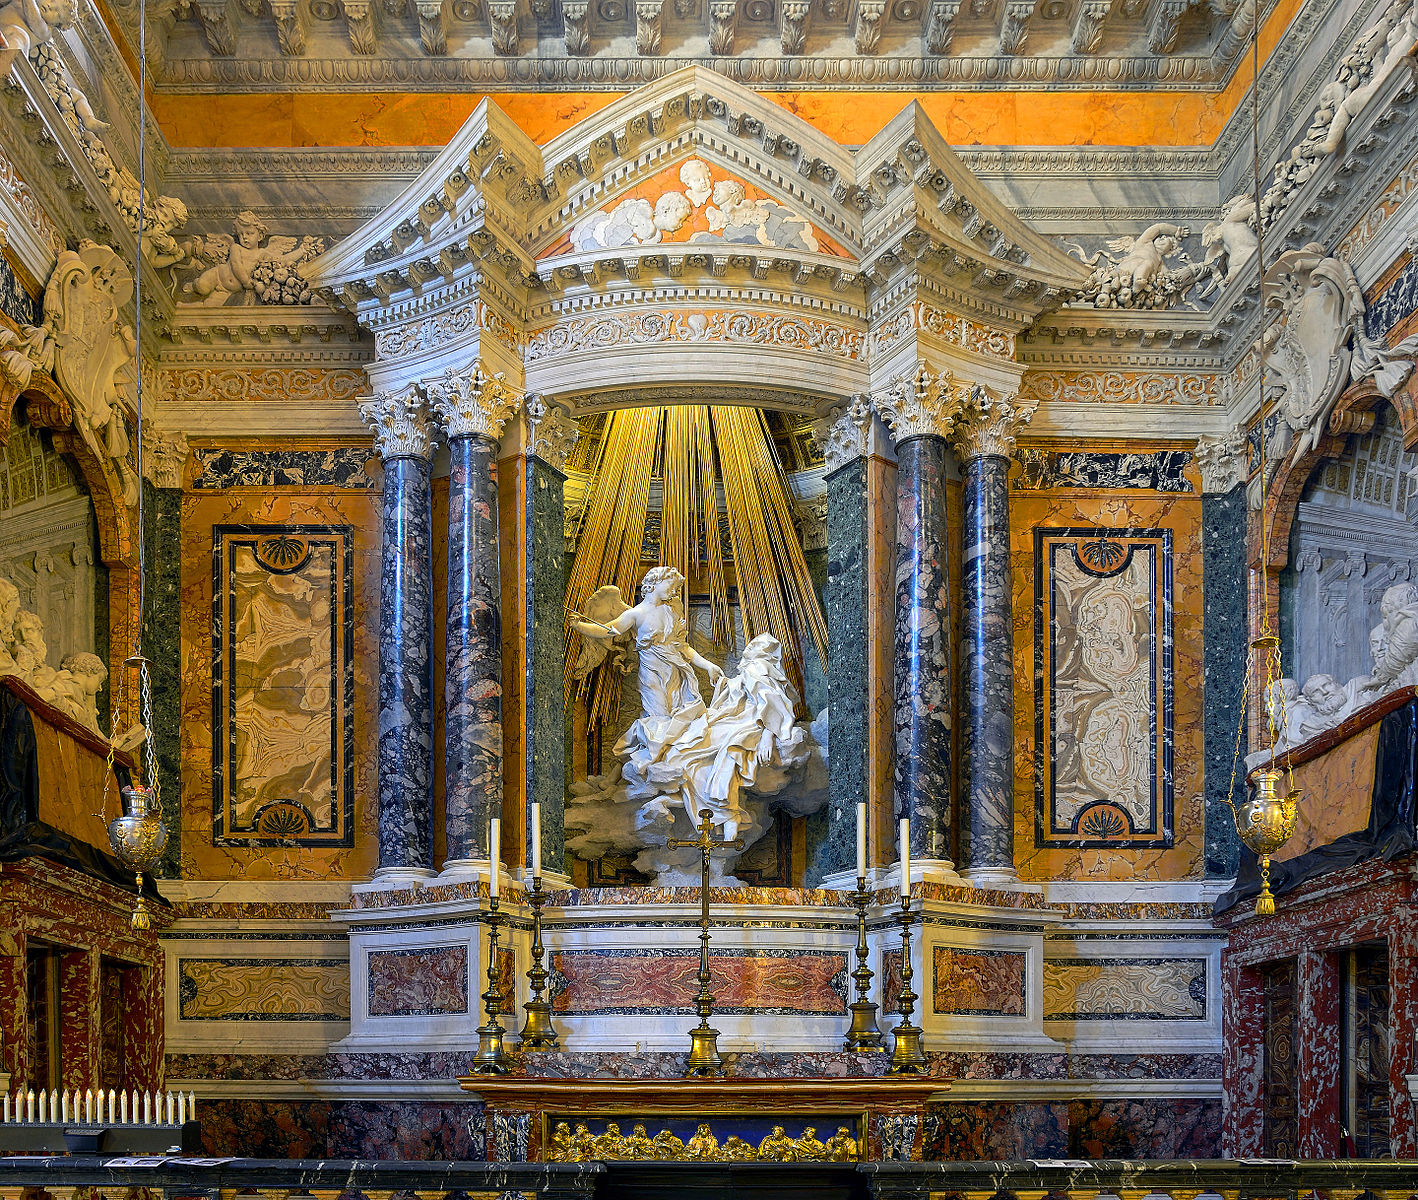 Religious scene of Saint Teresa carved out of marble